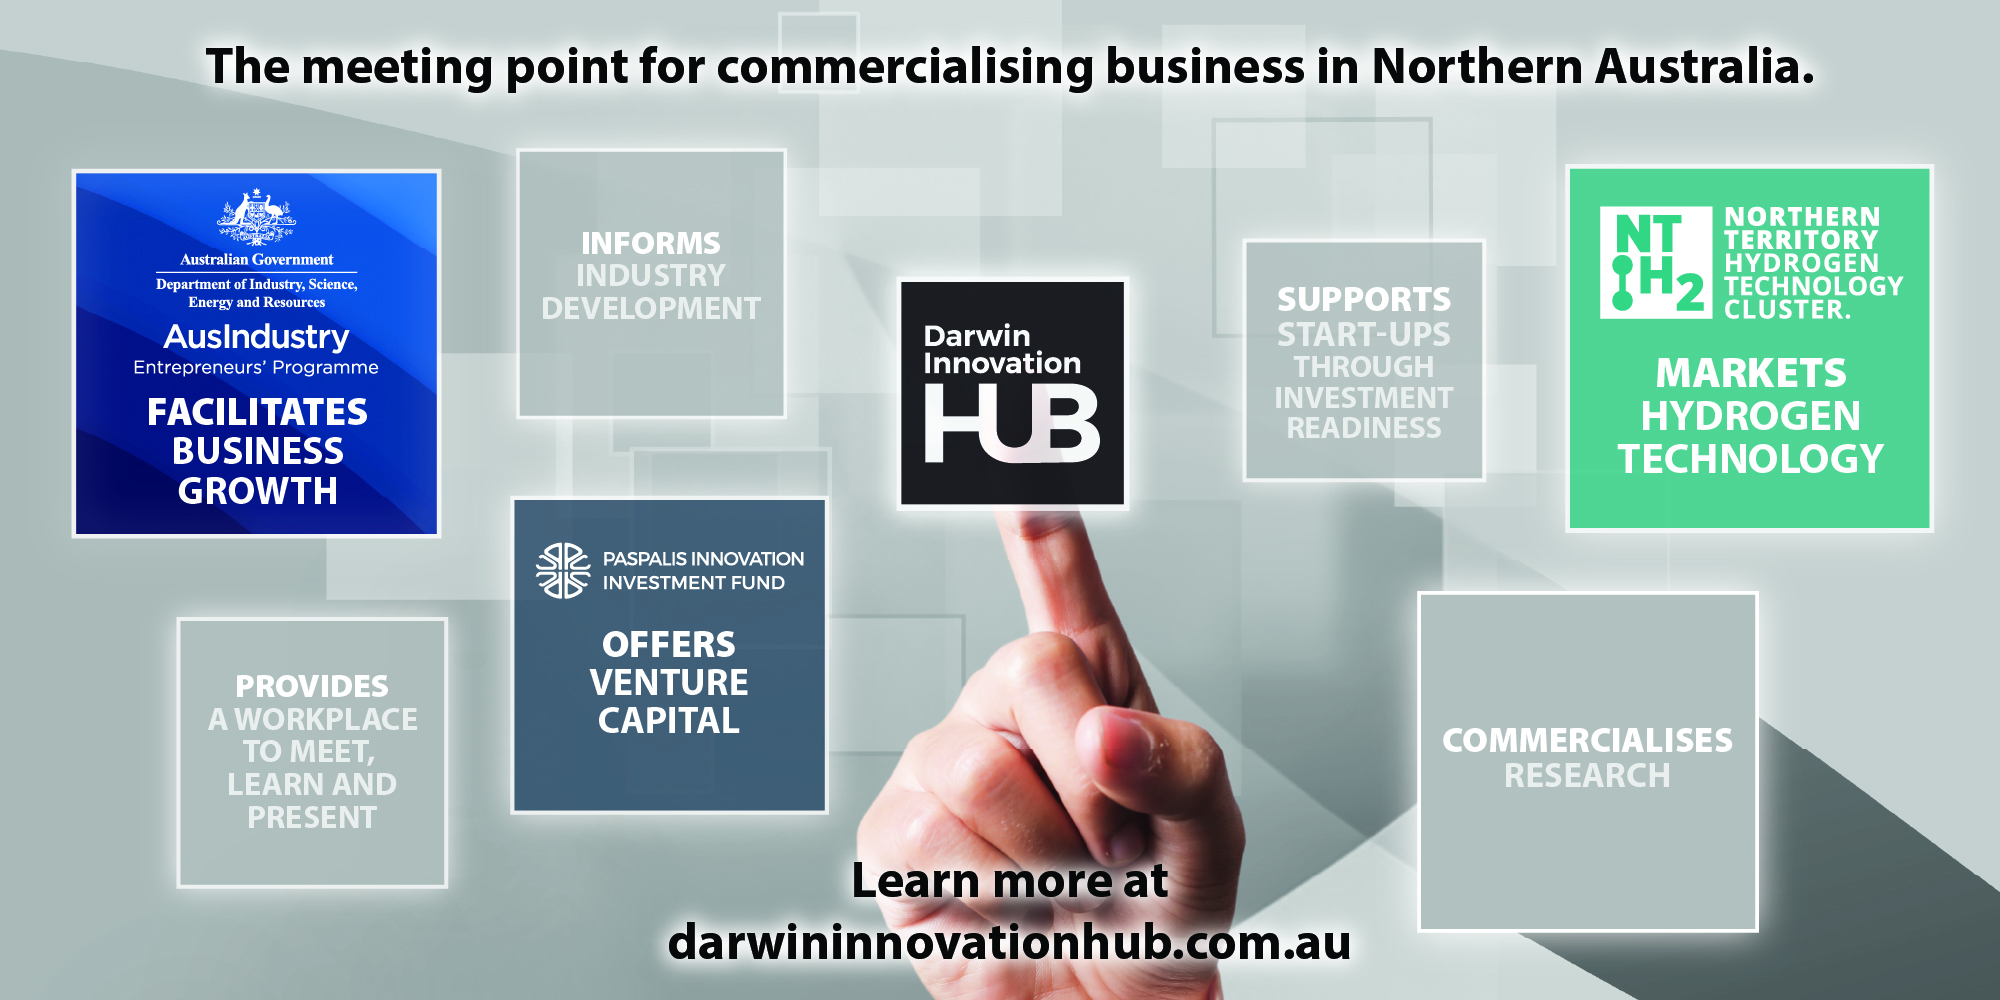 The Meeting Point for Commercialising Business in Northern Australia